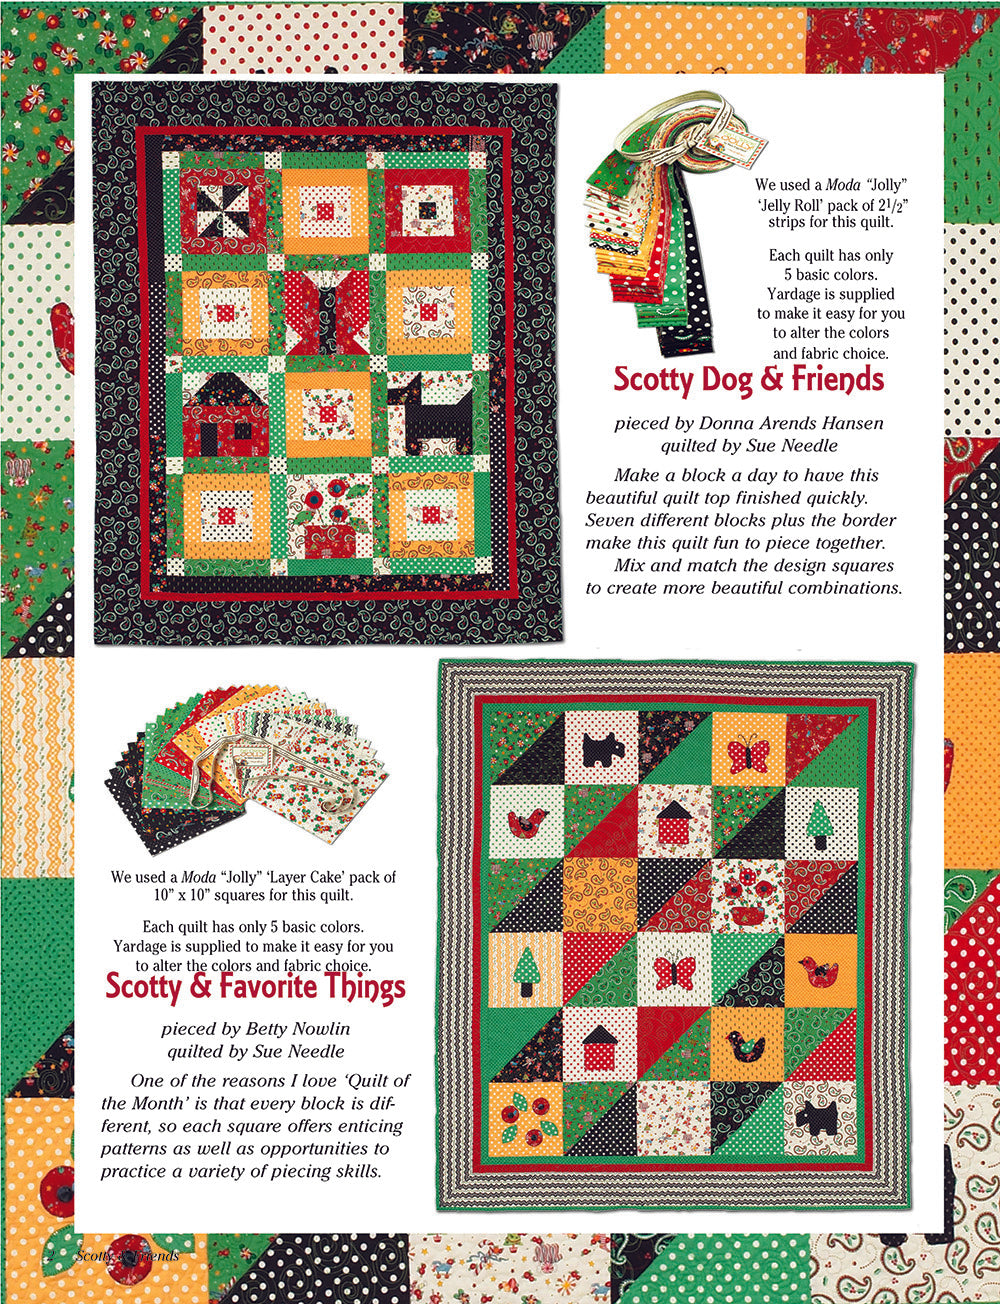 Scotty & Friends: Quilt Of The Month